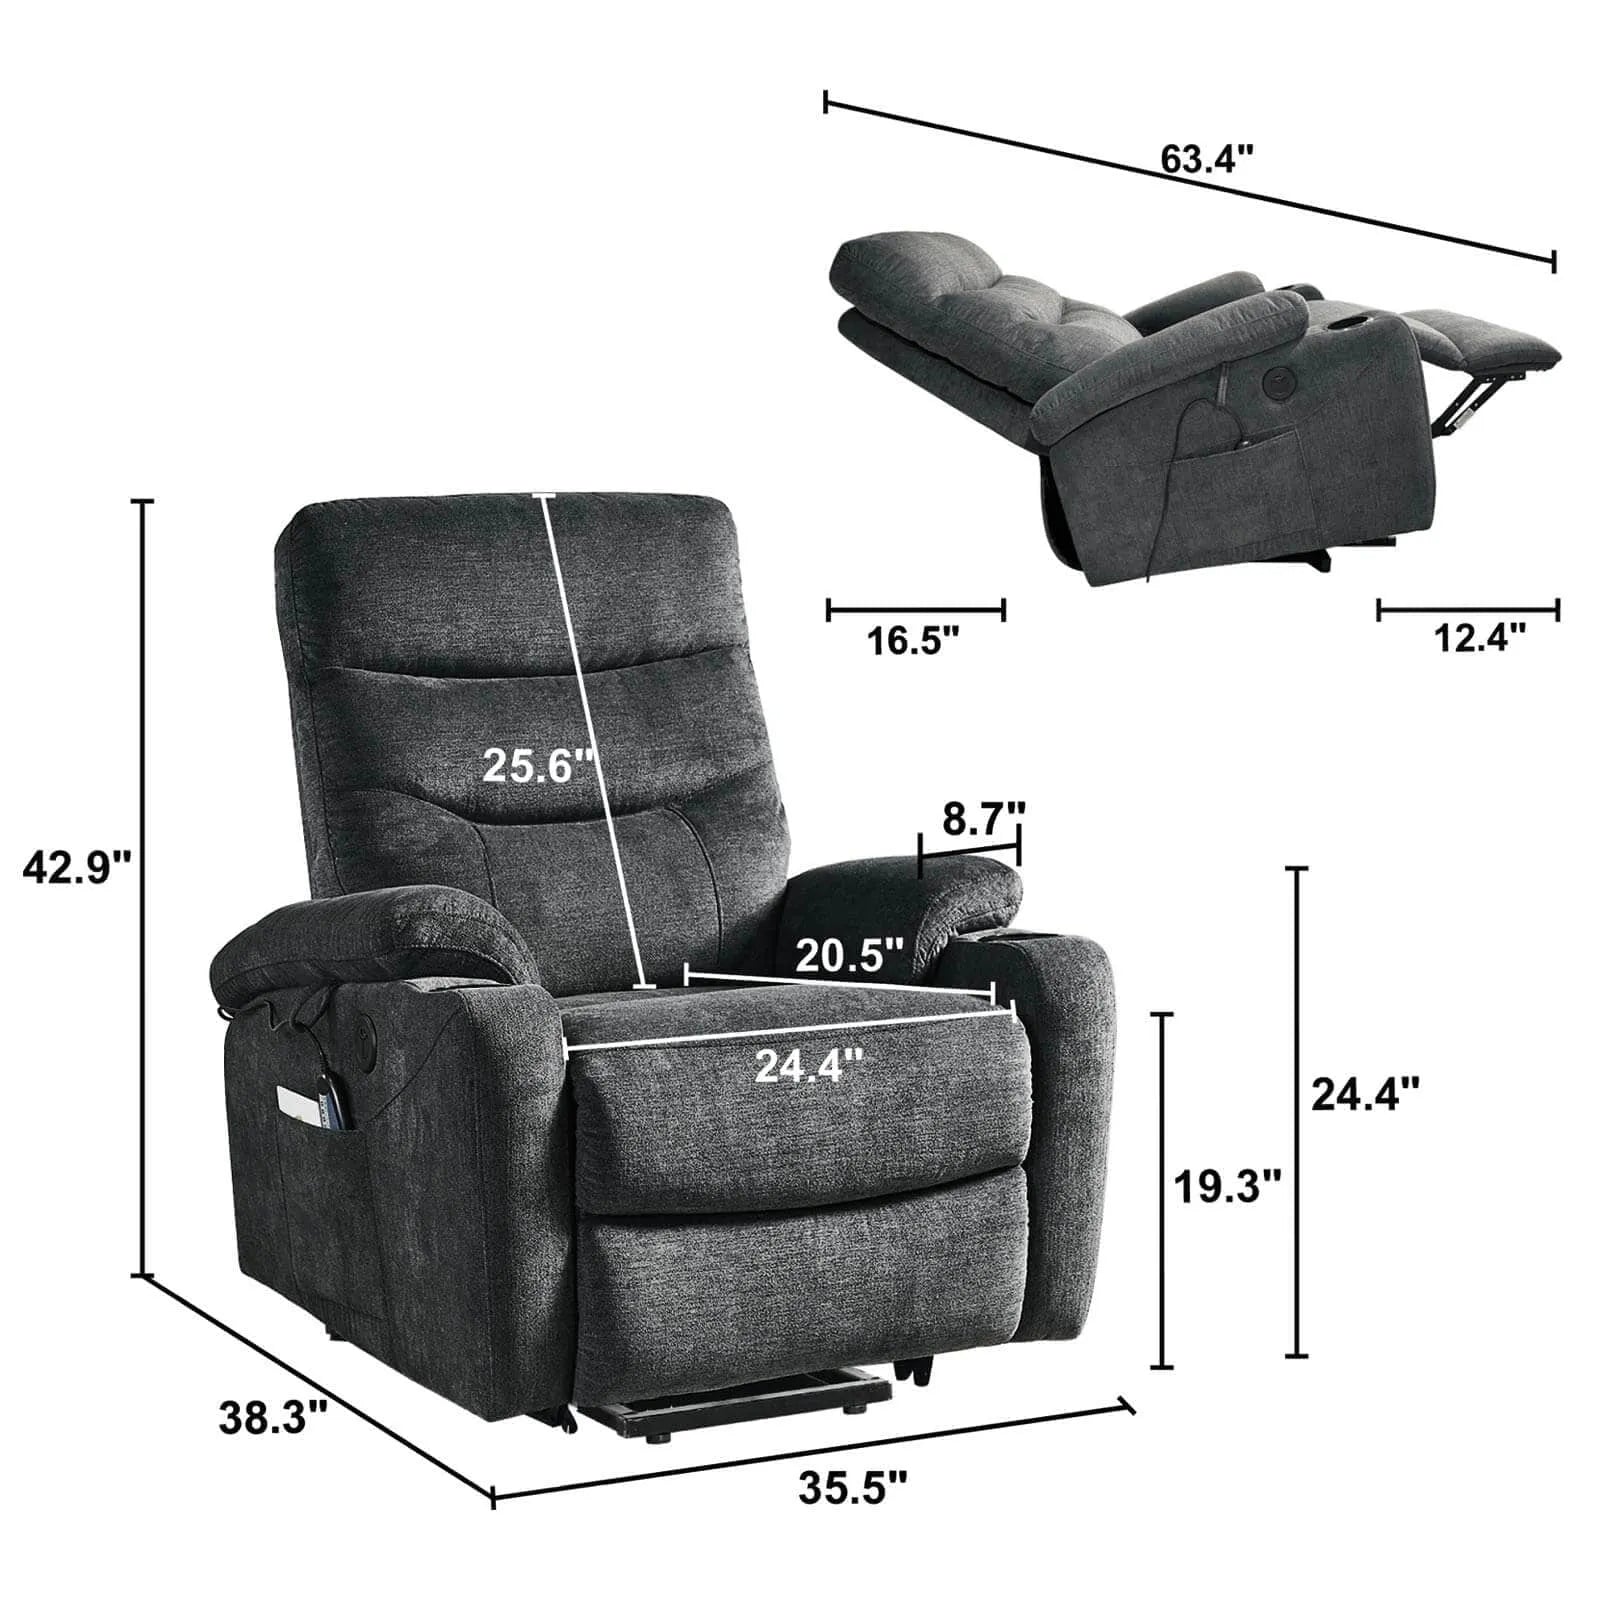 size of fabric lift recliner chair